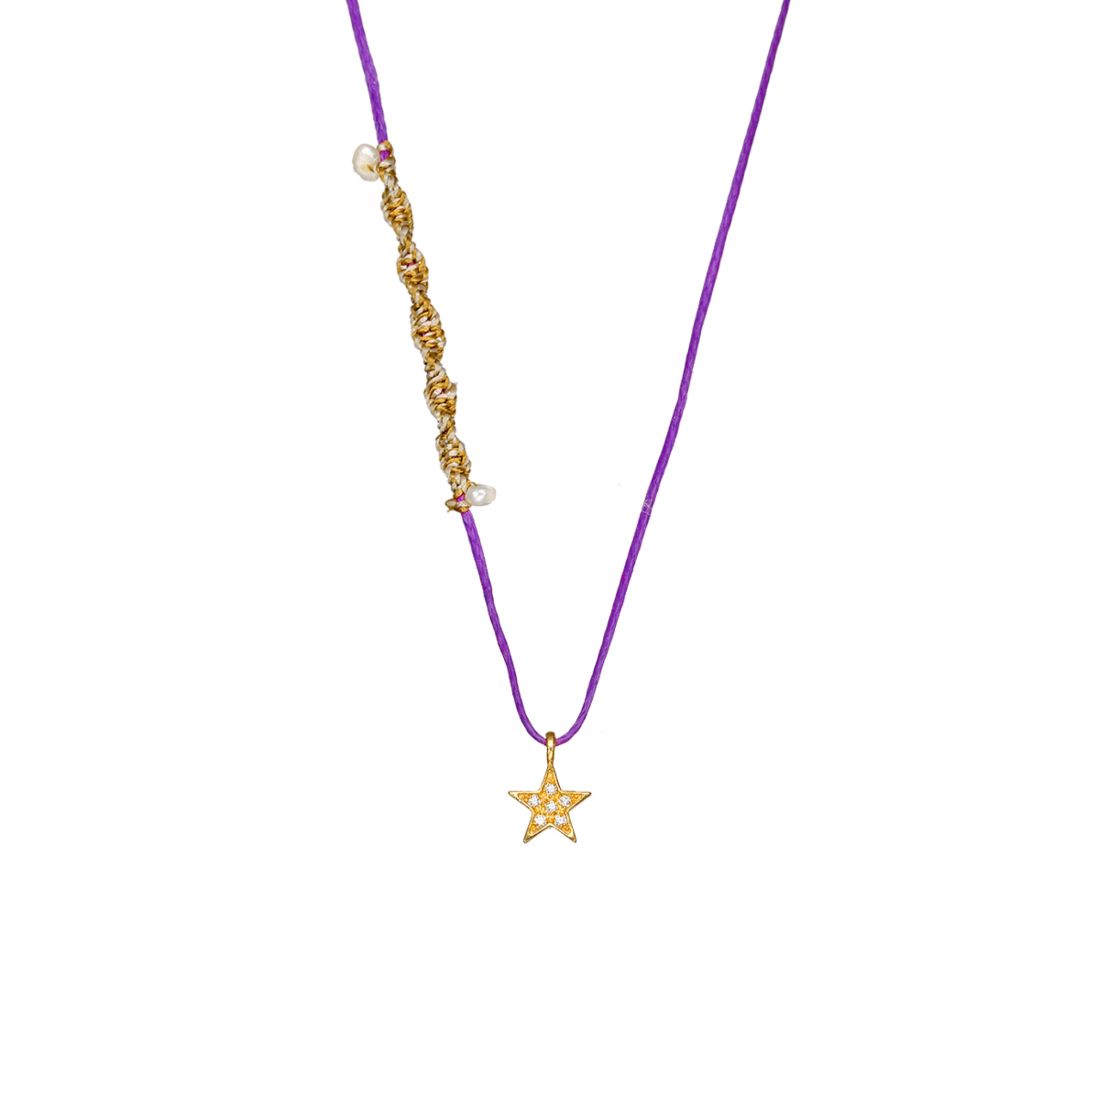 Gold star charm set with zircon stones on a purple cord with gold macrame detail and pearls.